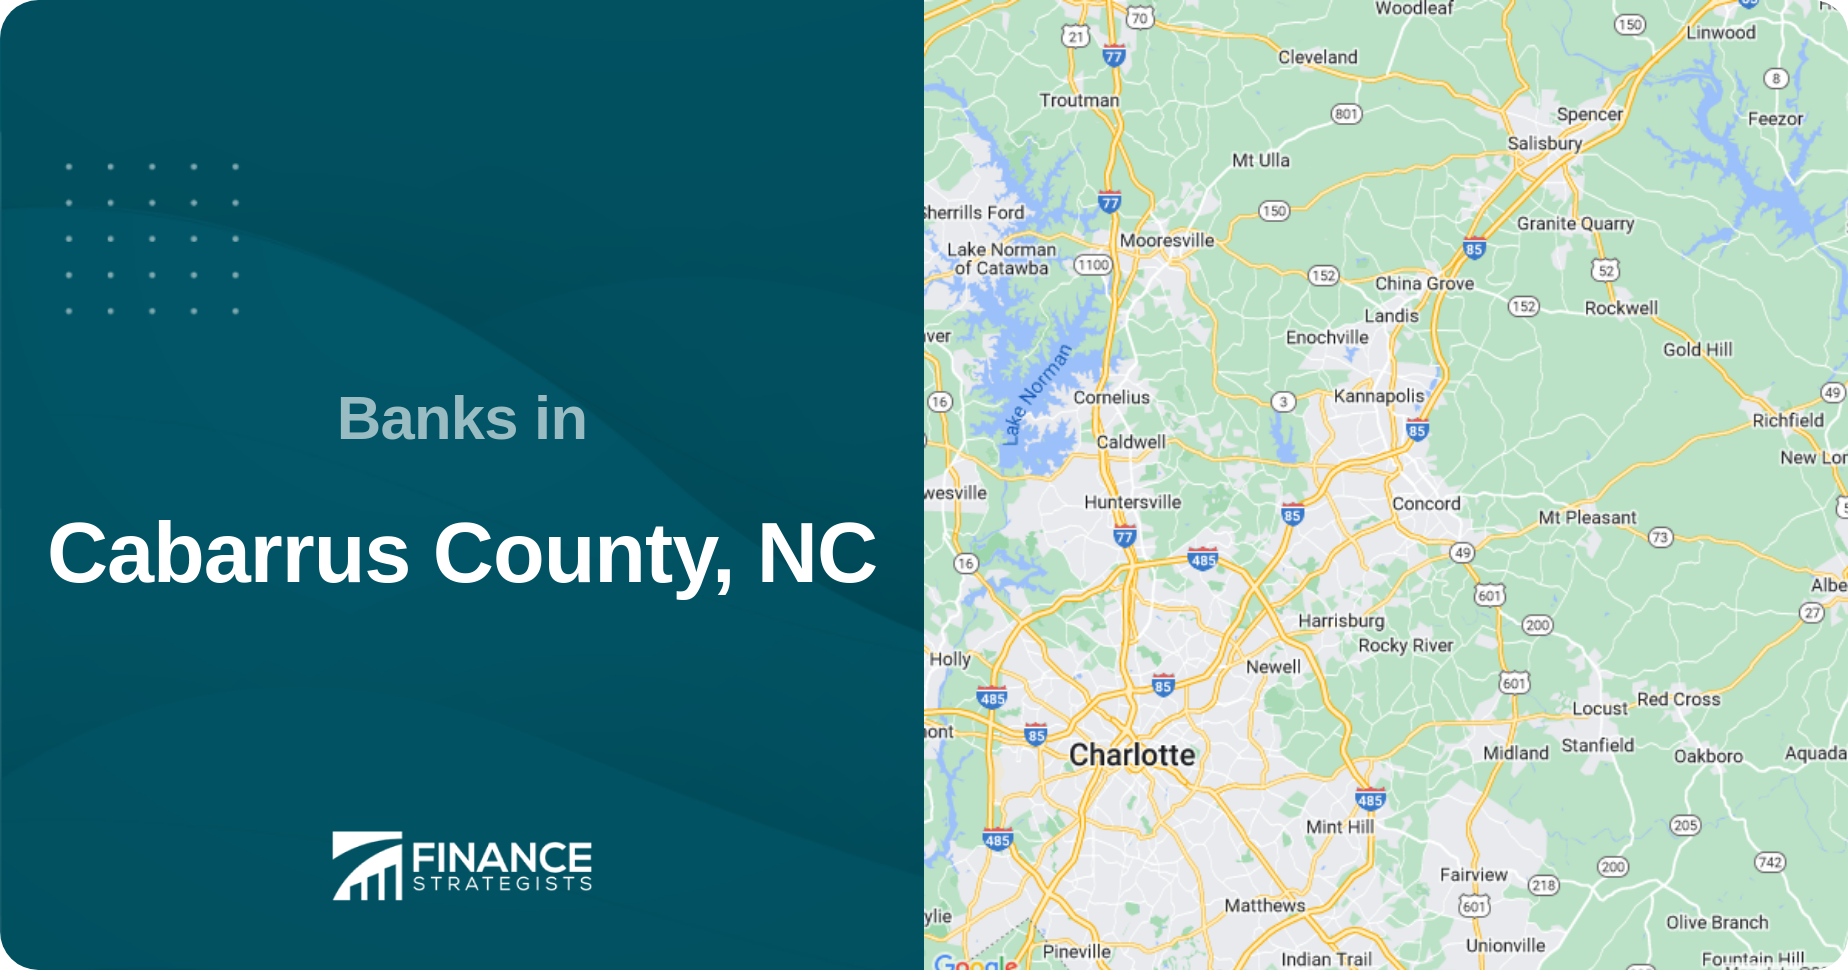 Banks in Cabarrus County, NC